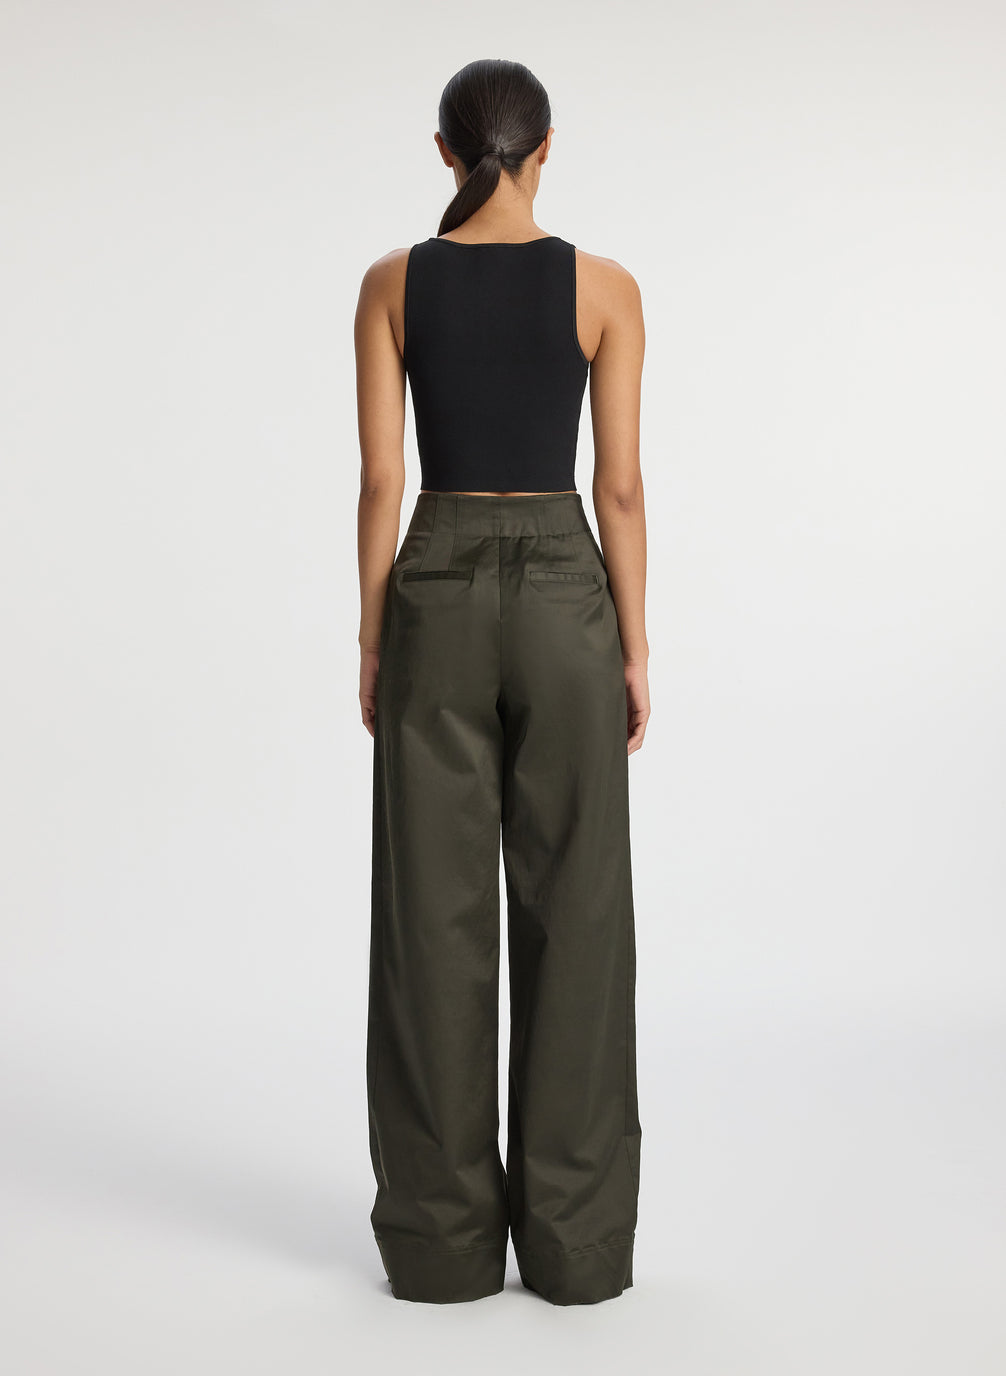 back view of woman wearing black compact knit tank top and olive green pants